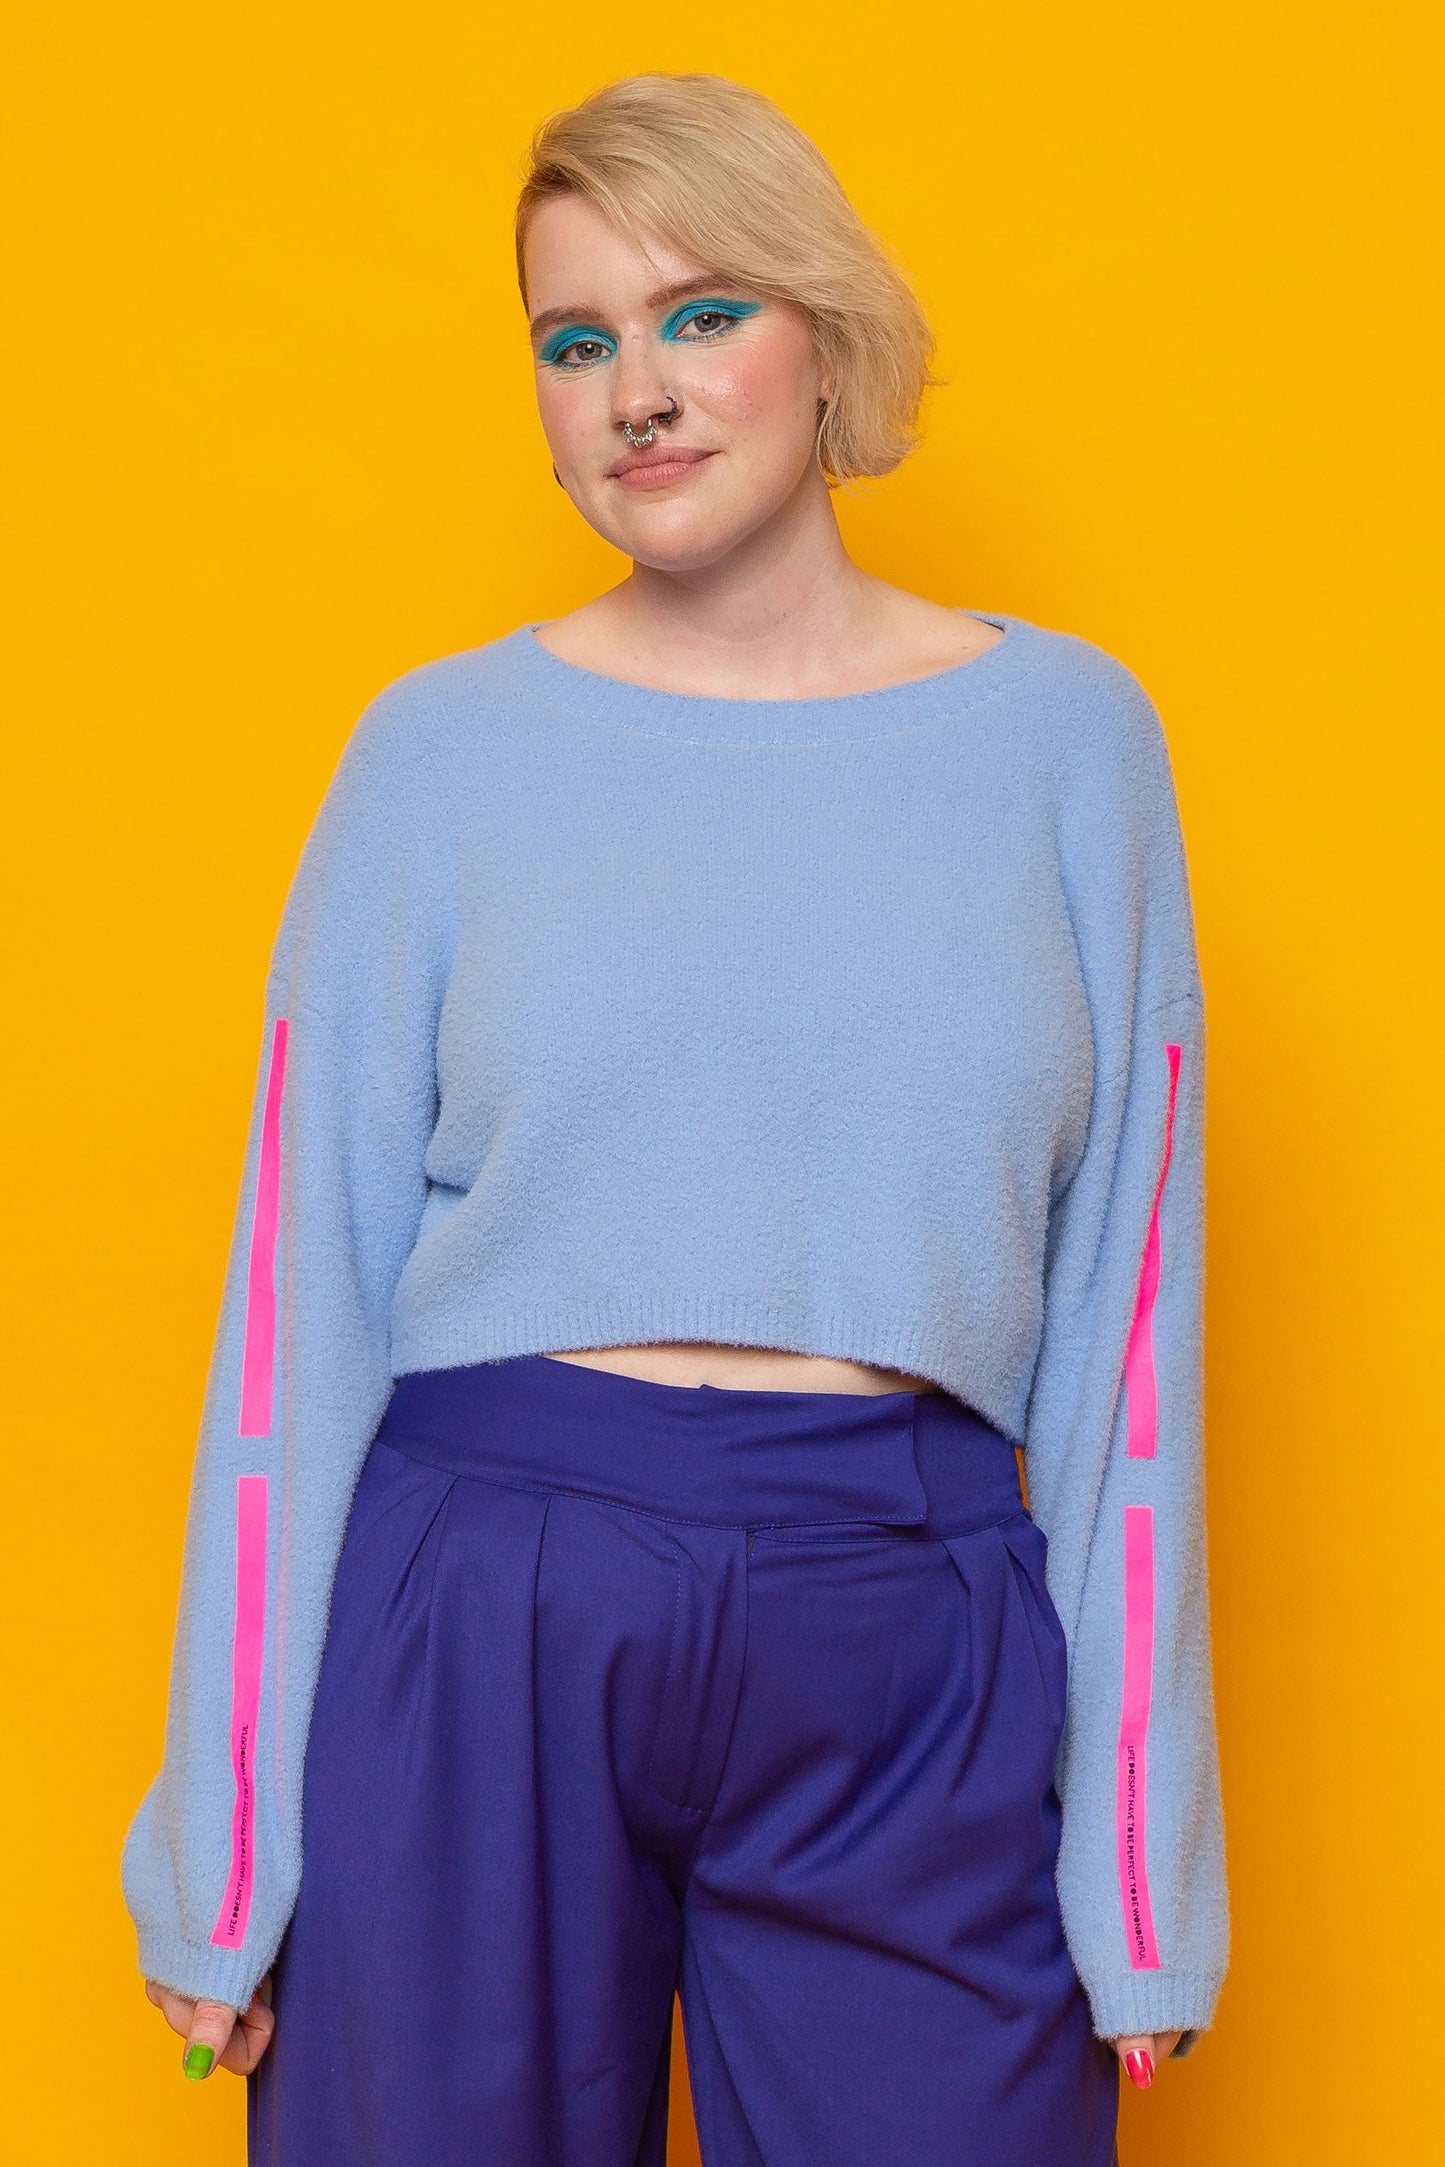 This is The Remix Jumper LIFE DOESN'T HAVE TO BE PERFECT TO BE WONDERFUL - Fluffy Cropped Jumper In Light Blue